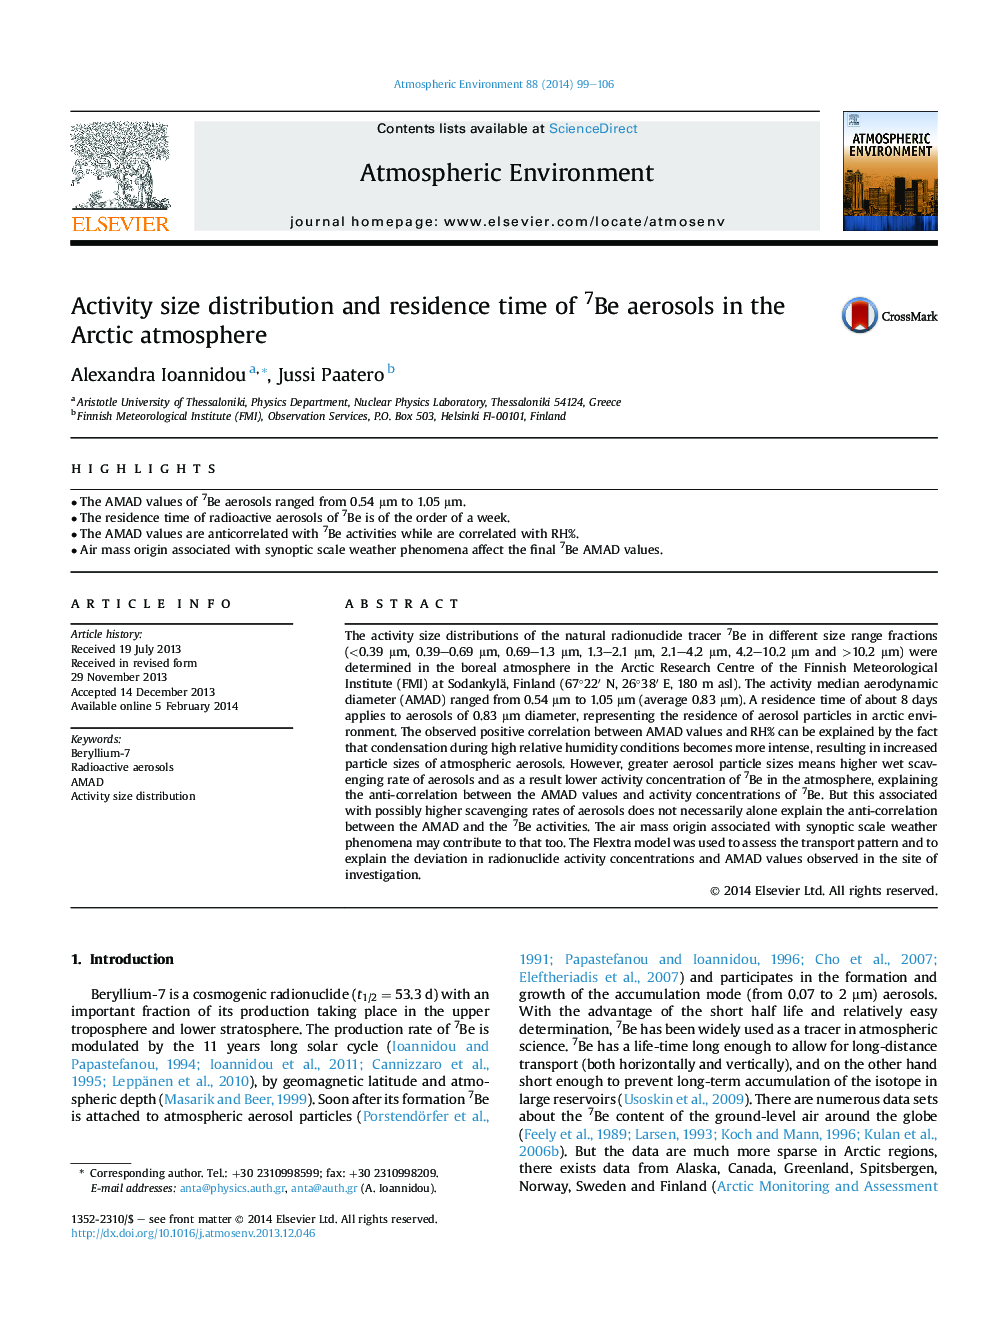 Activity size distribution and residence time of 7Be aerosols in the Arctic atmosphere